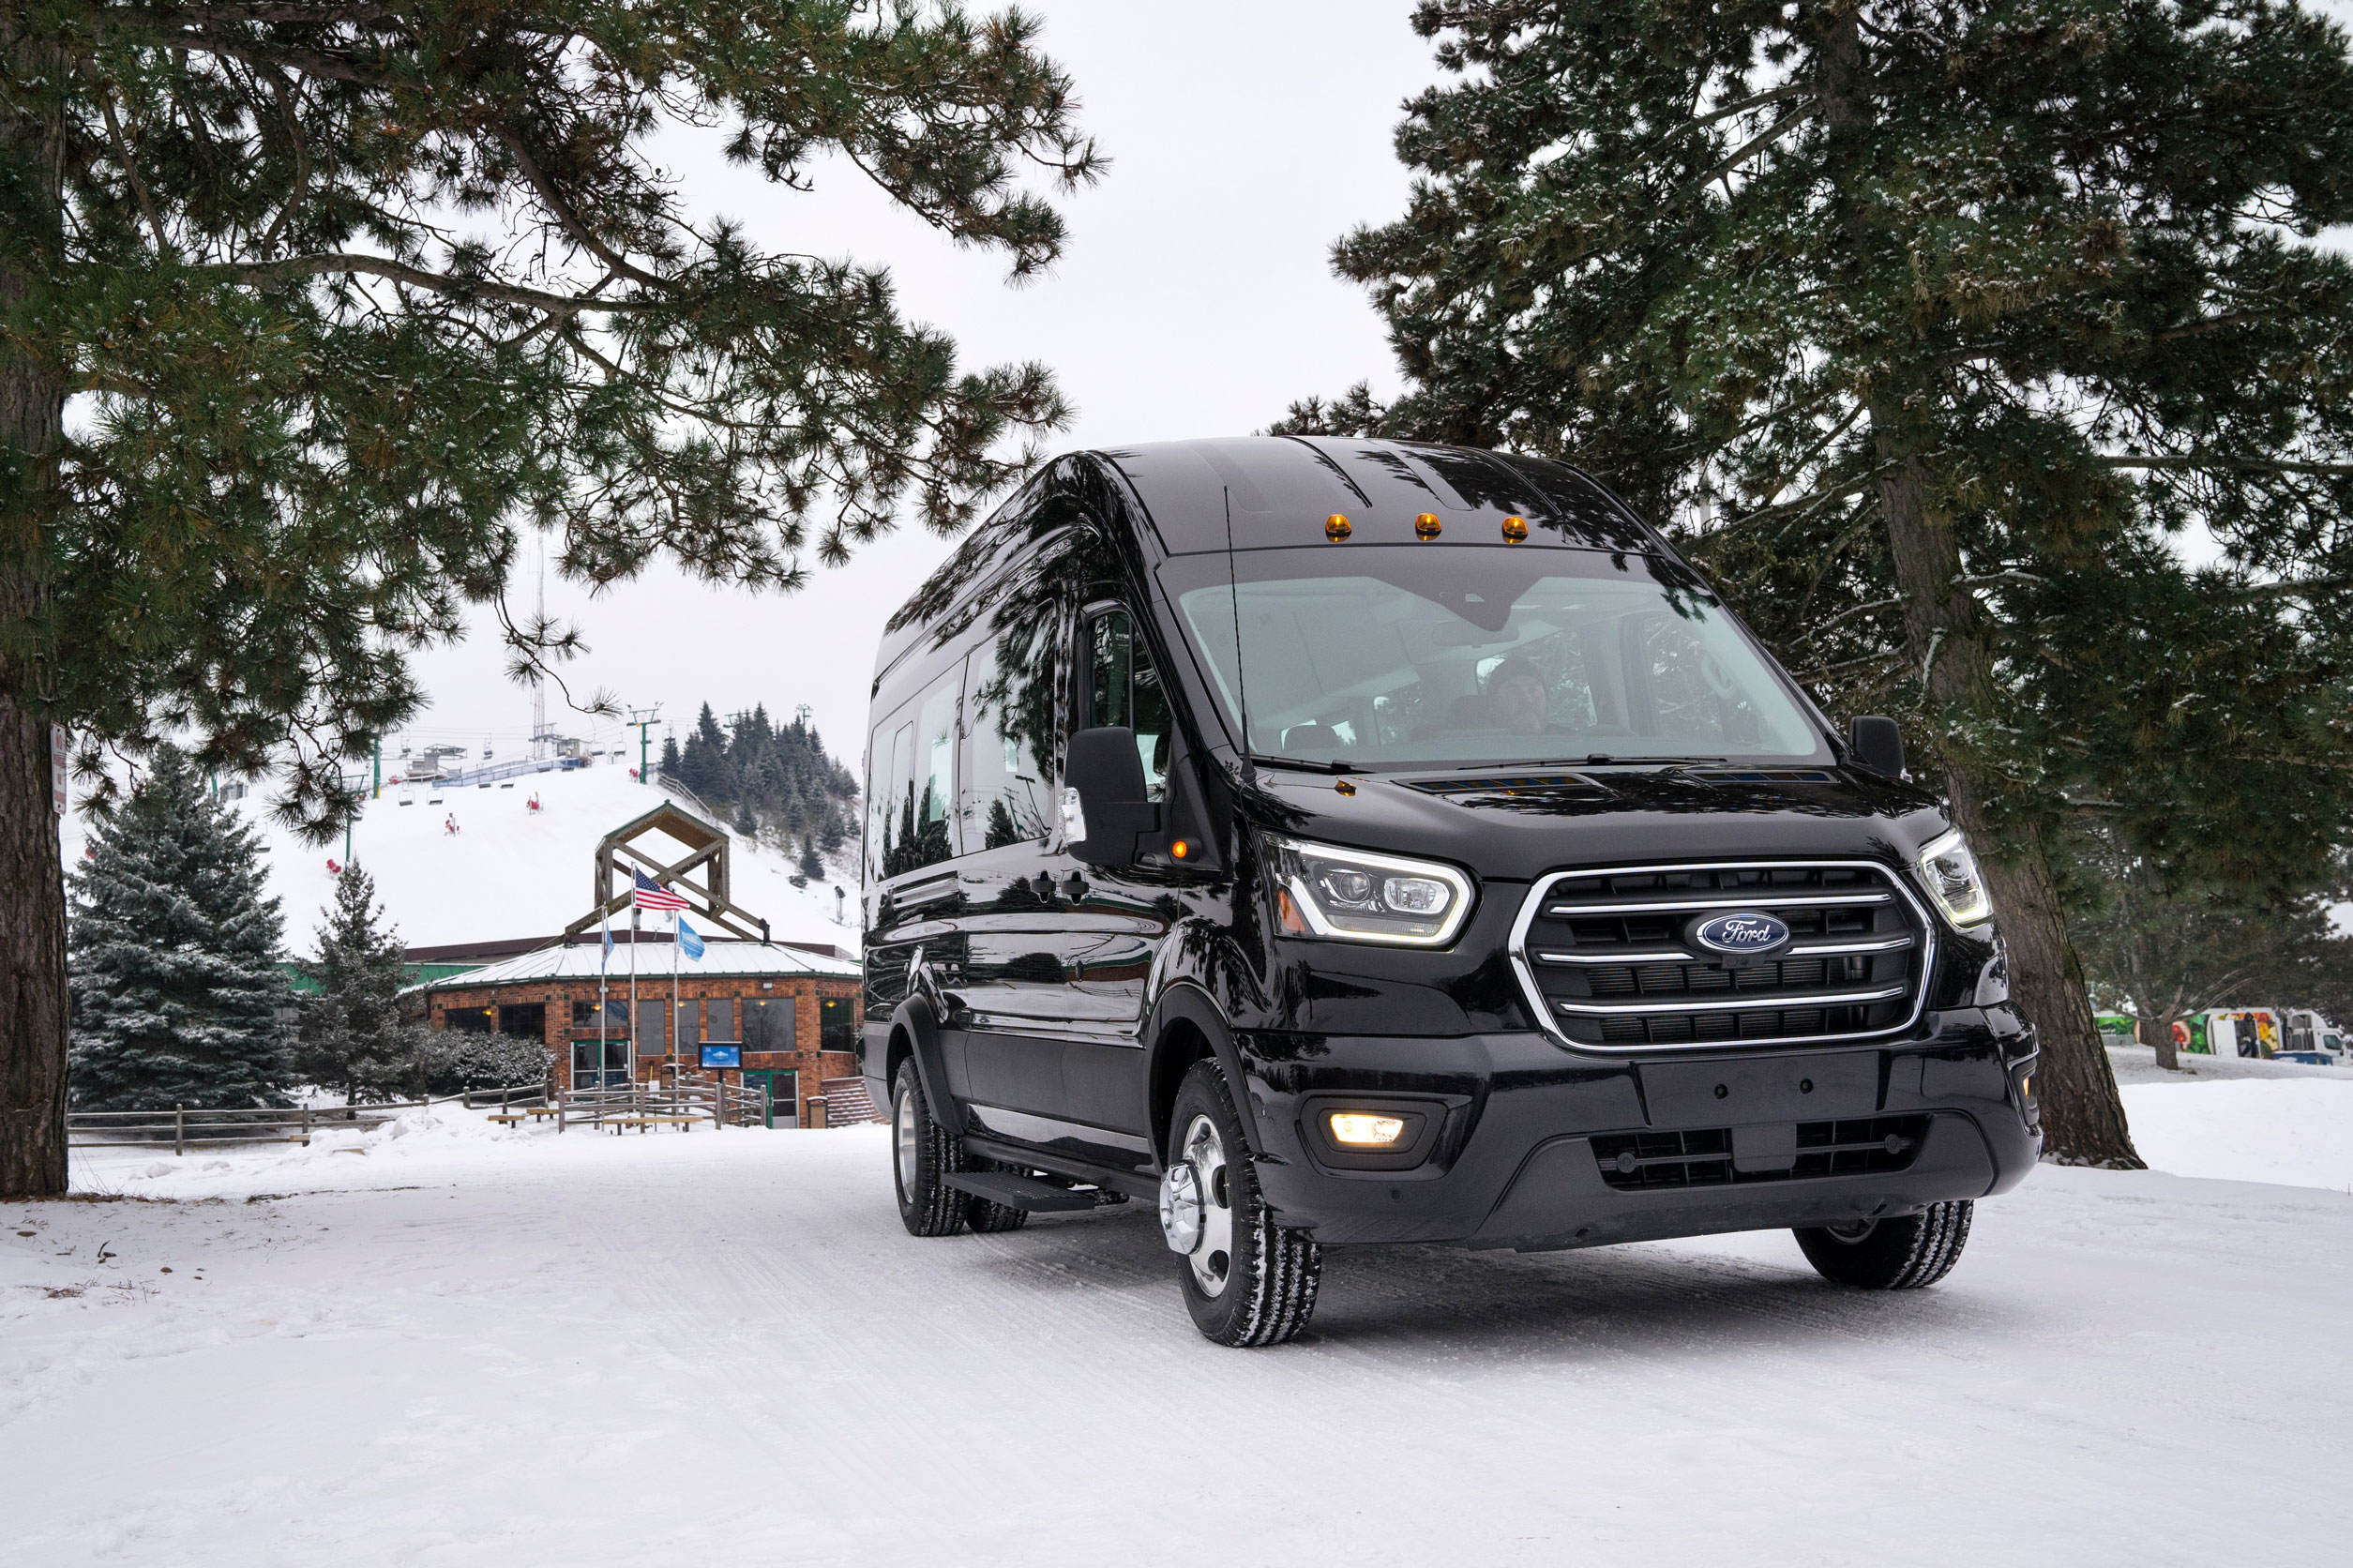 New 2022 Ford Transit 4x4 Release Date ...